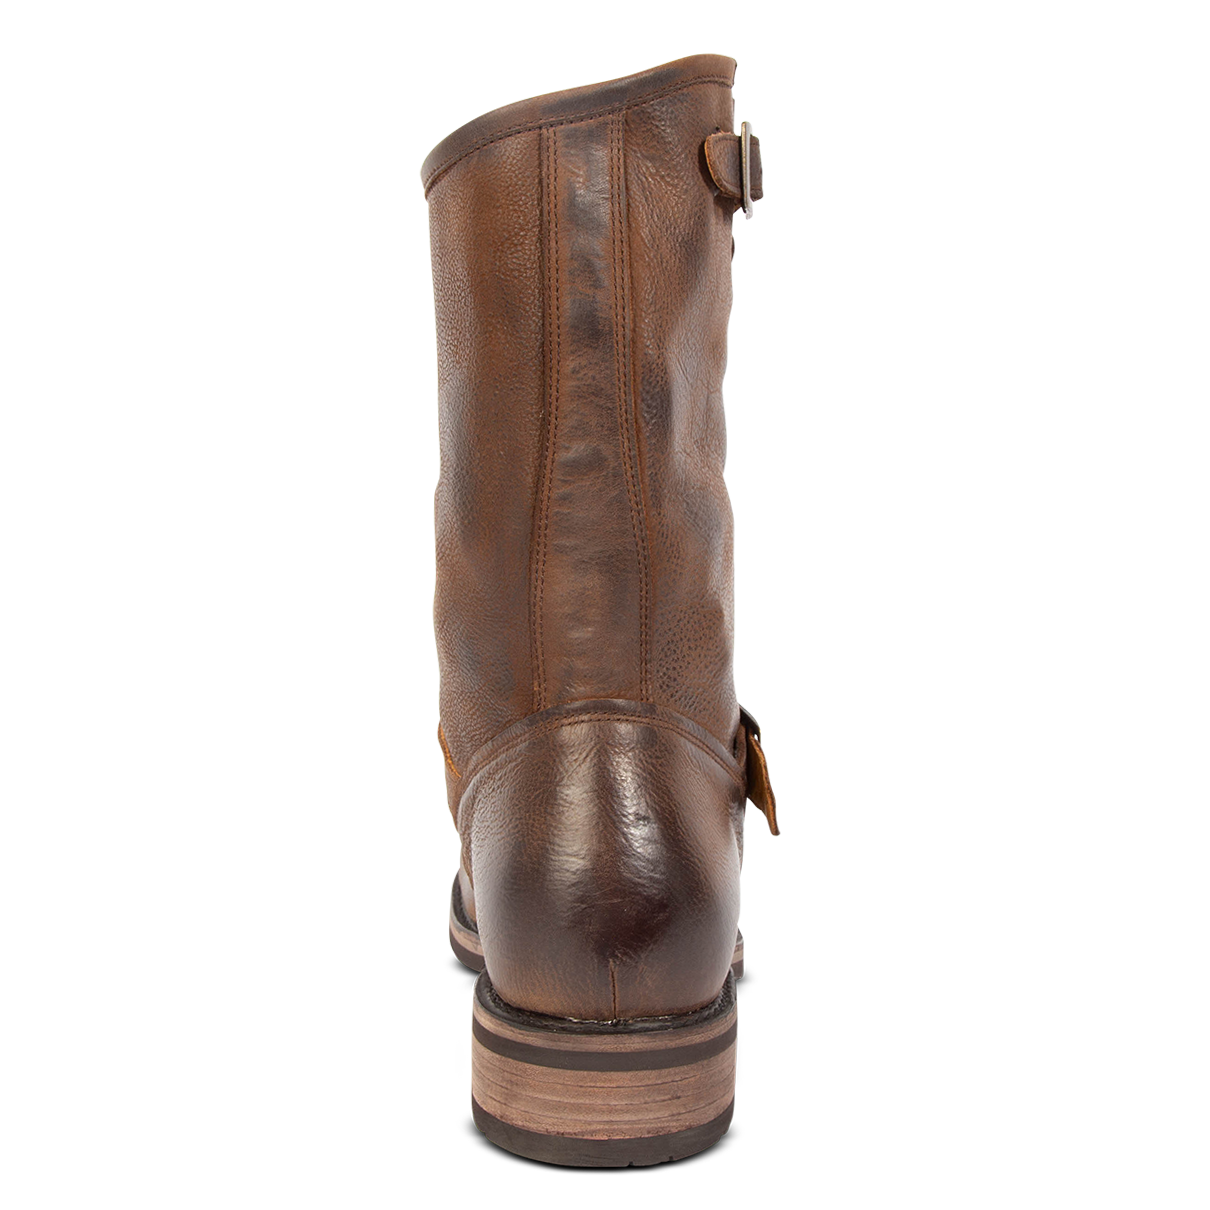 Back view showing low heel on FREEBIRD men's Easton brown tall boot